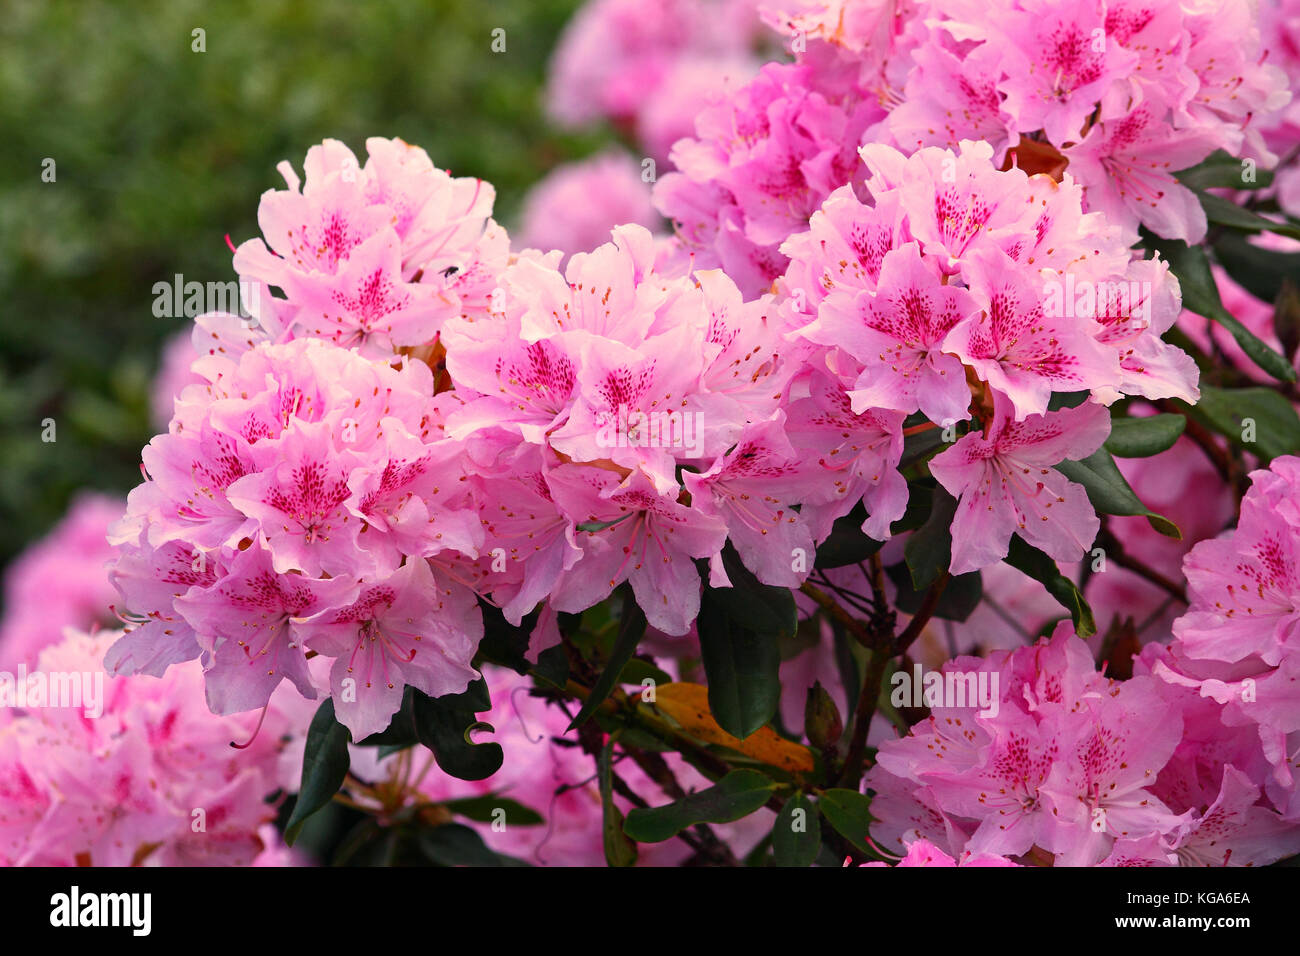 Pink rhododendron flowers in full bloom Stock Photo